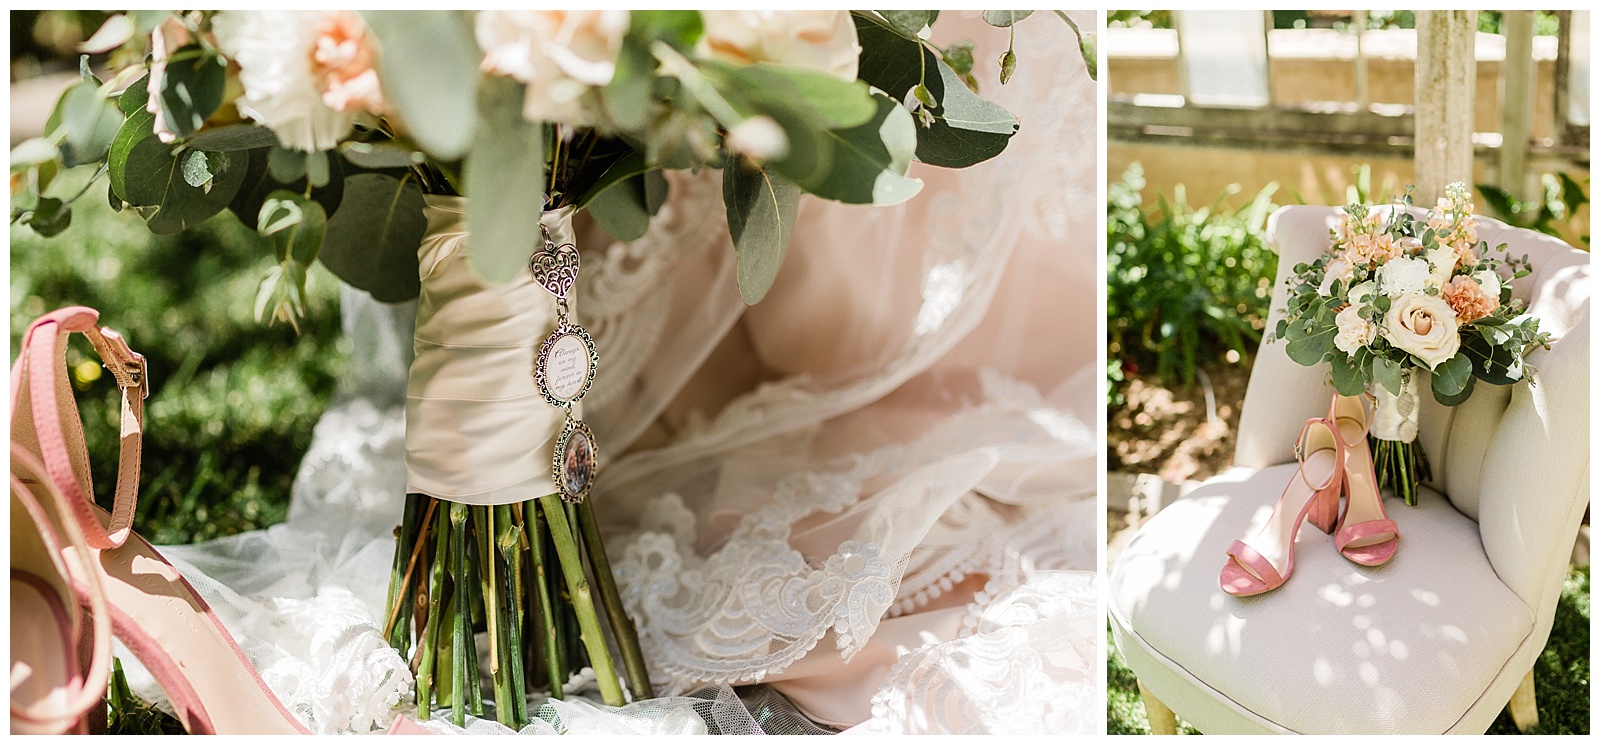 blush and ivory bridal details on a wedding bouquet and blush velvet wedding shoes